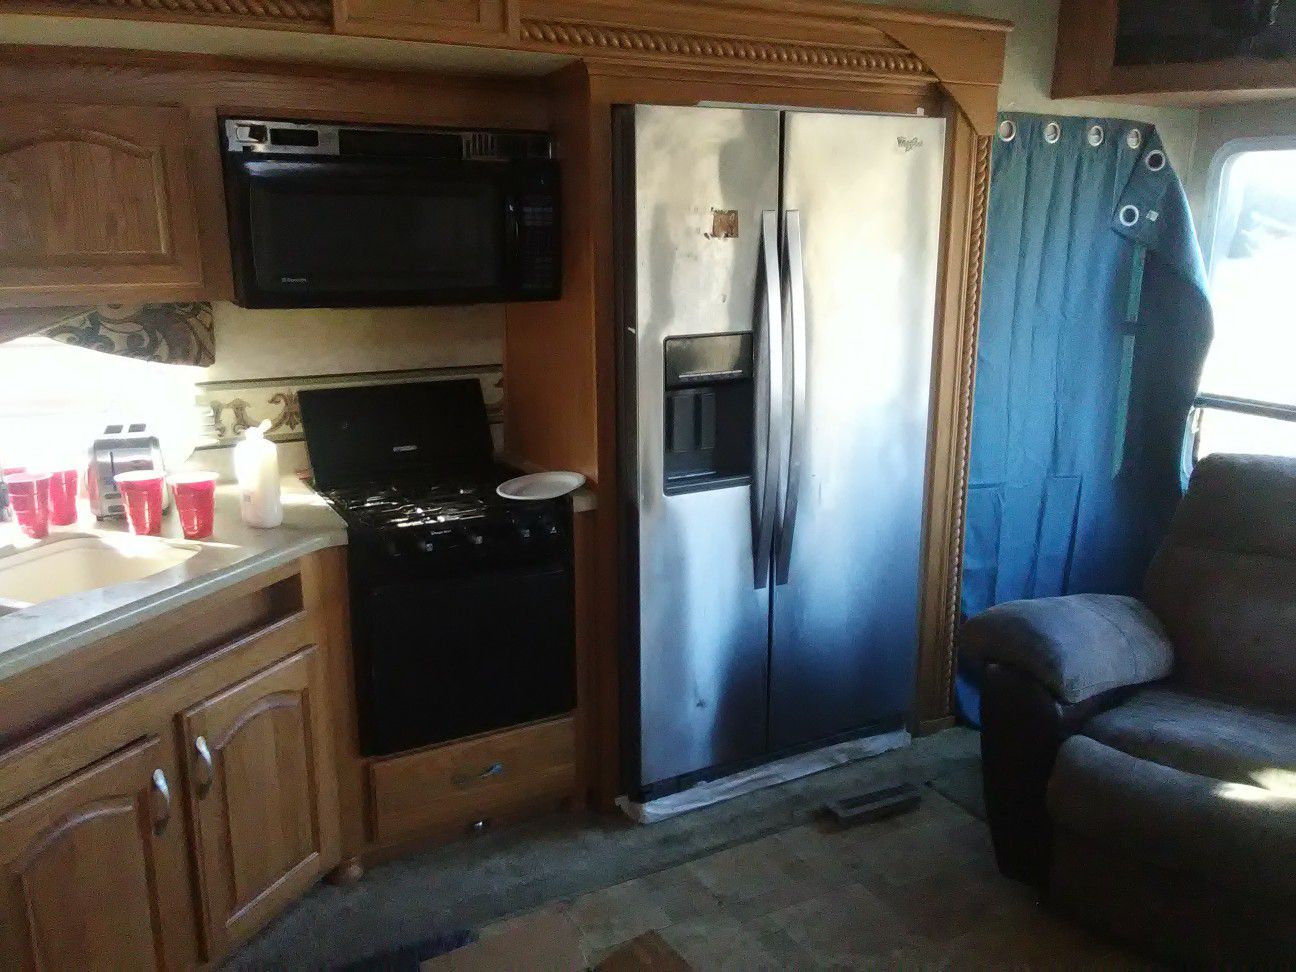 2006 Prowler 5th wheel slide out